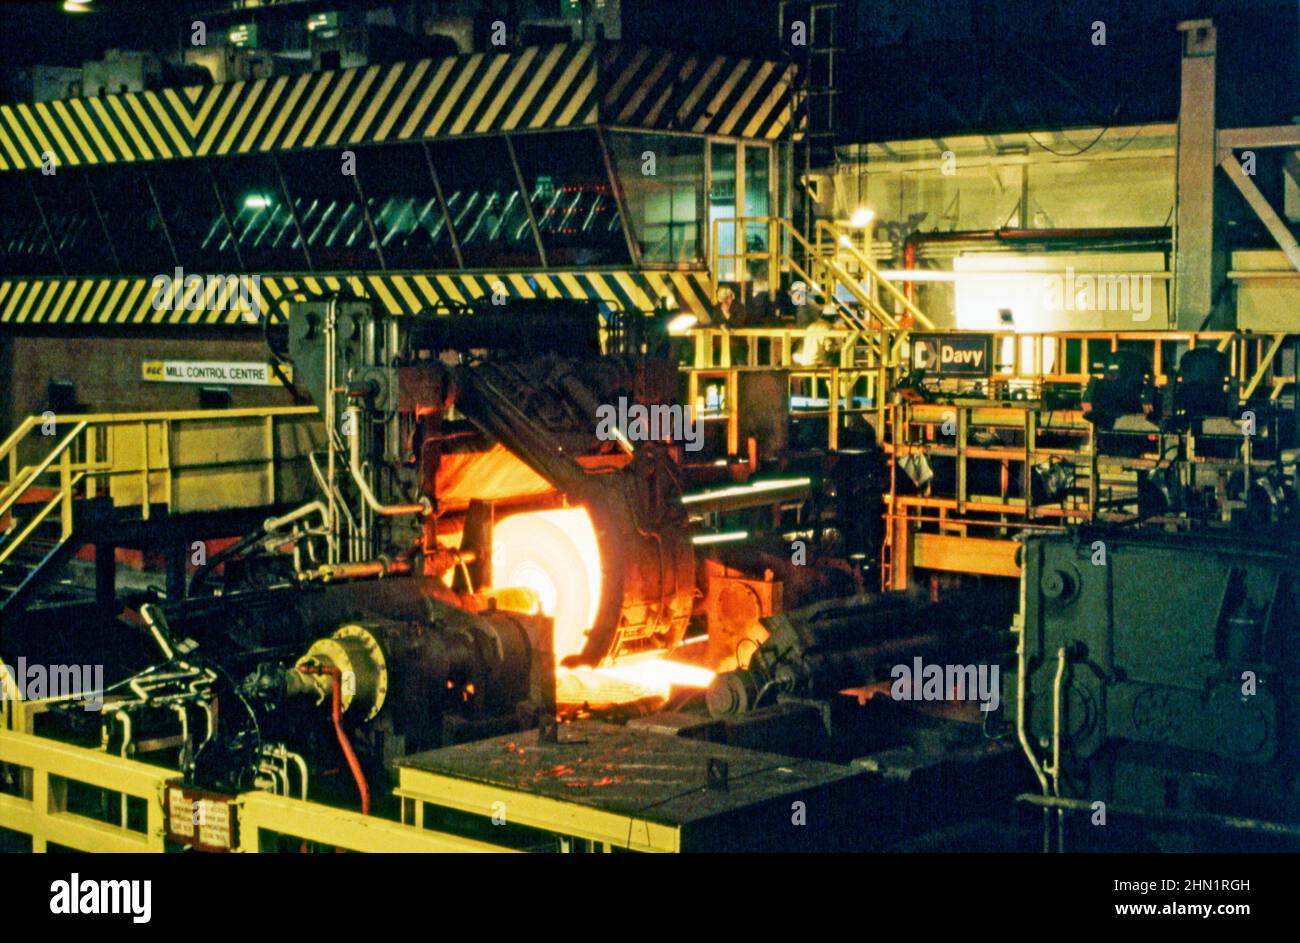 A mid-1980s view inside the Port Talbot Steelworks, an integrated steel production plant in Port Talbot, West Glamorgan, Wales, UK. Inside the mill hot sheet-steel is being rolled out on the production line. The Mill Control Centre is in the background. This image is from a vintage colour transparency – a vintage 1980s photograph. Stock Photo